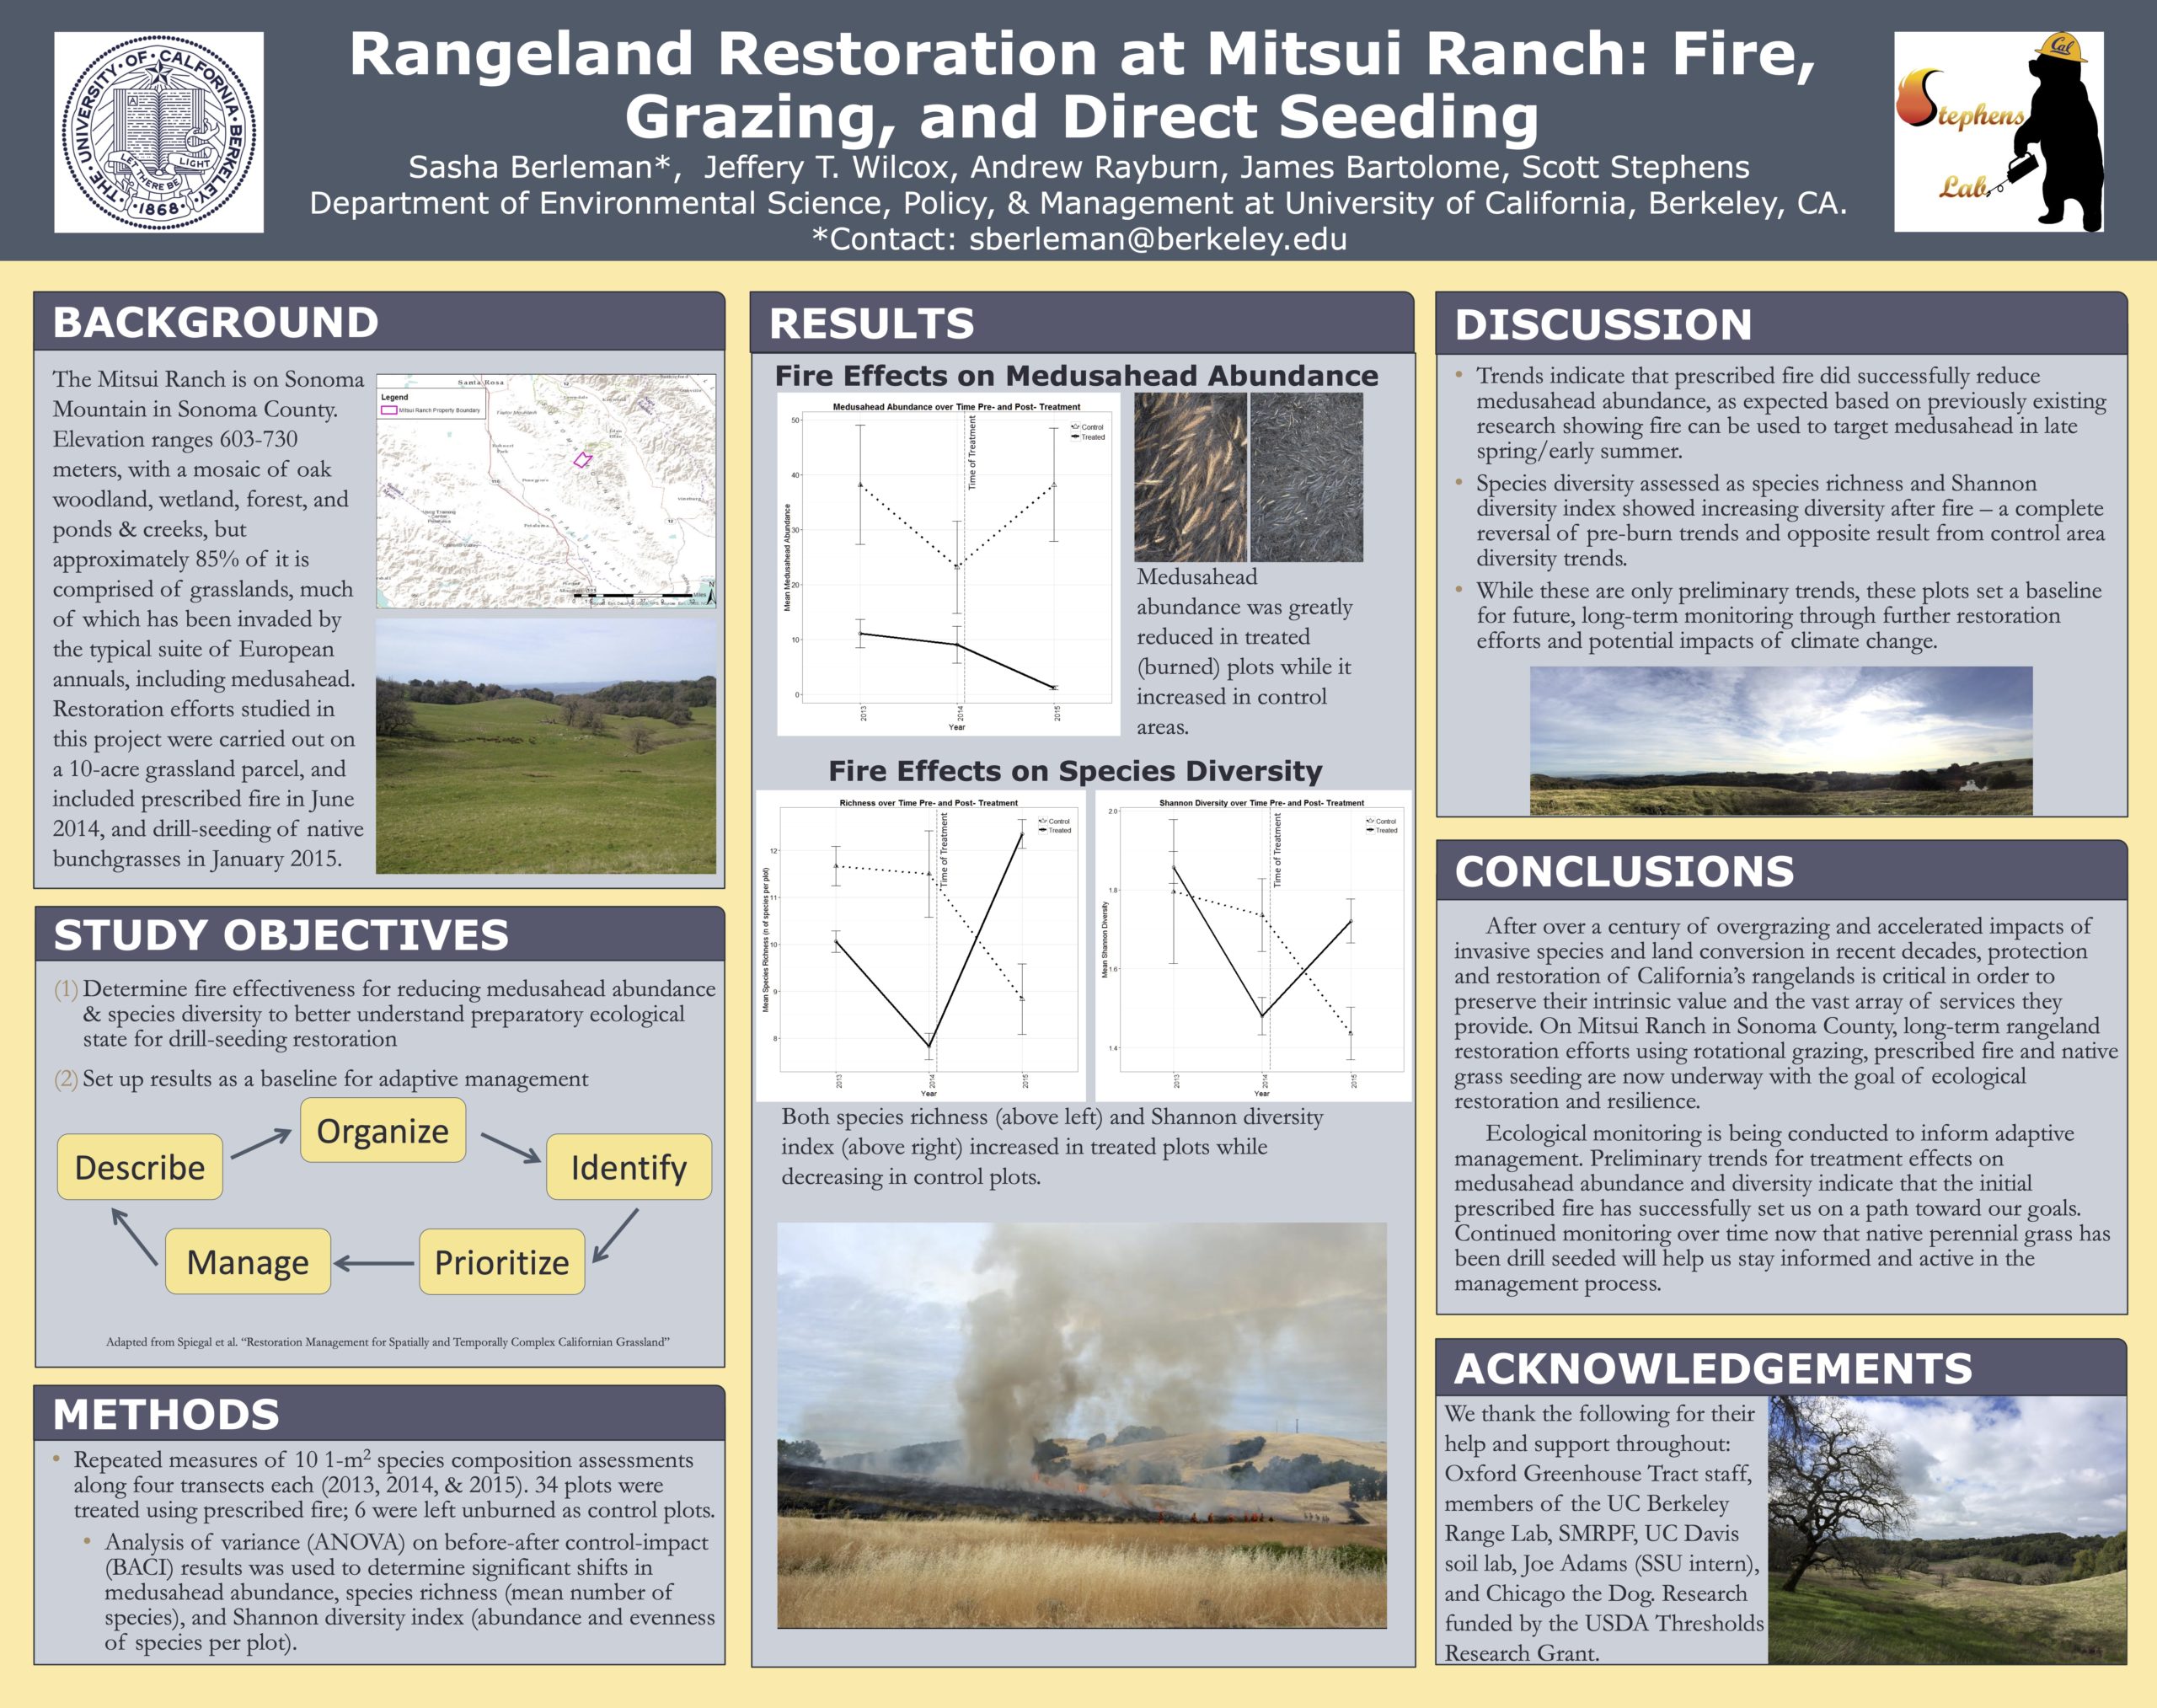 Berleman, S., J. T. Wilcox, A. P. Rayburn, J. Bartolome, and S. Stephens. 2017. Rangeland restoration at Mitsui Ranch: fire, grazing, and direct seeding. Poster Presentation. California Rangeland Conservation Coalition, Annual Meeting, Davis, CA.